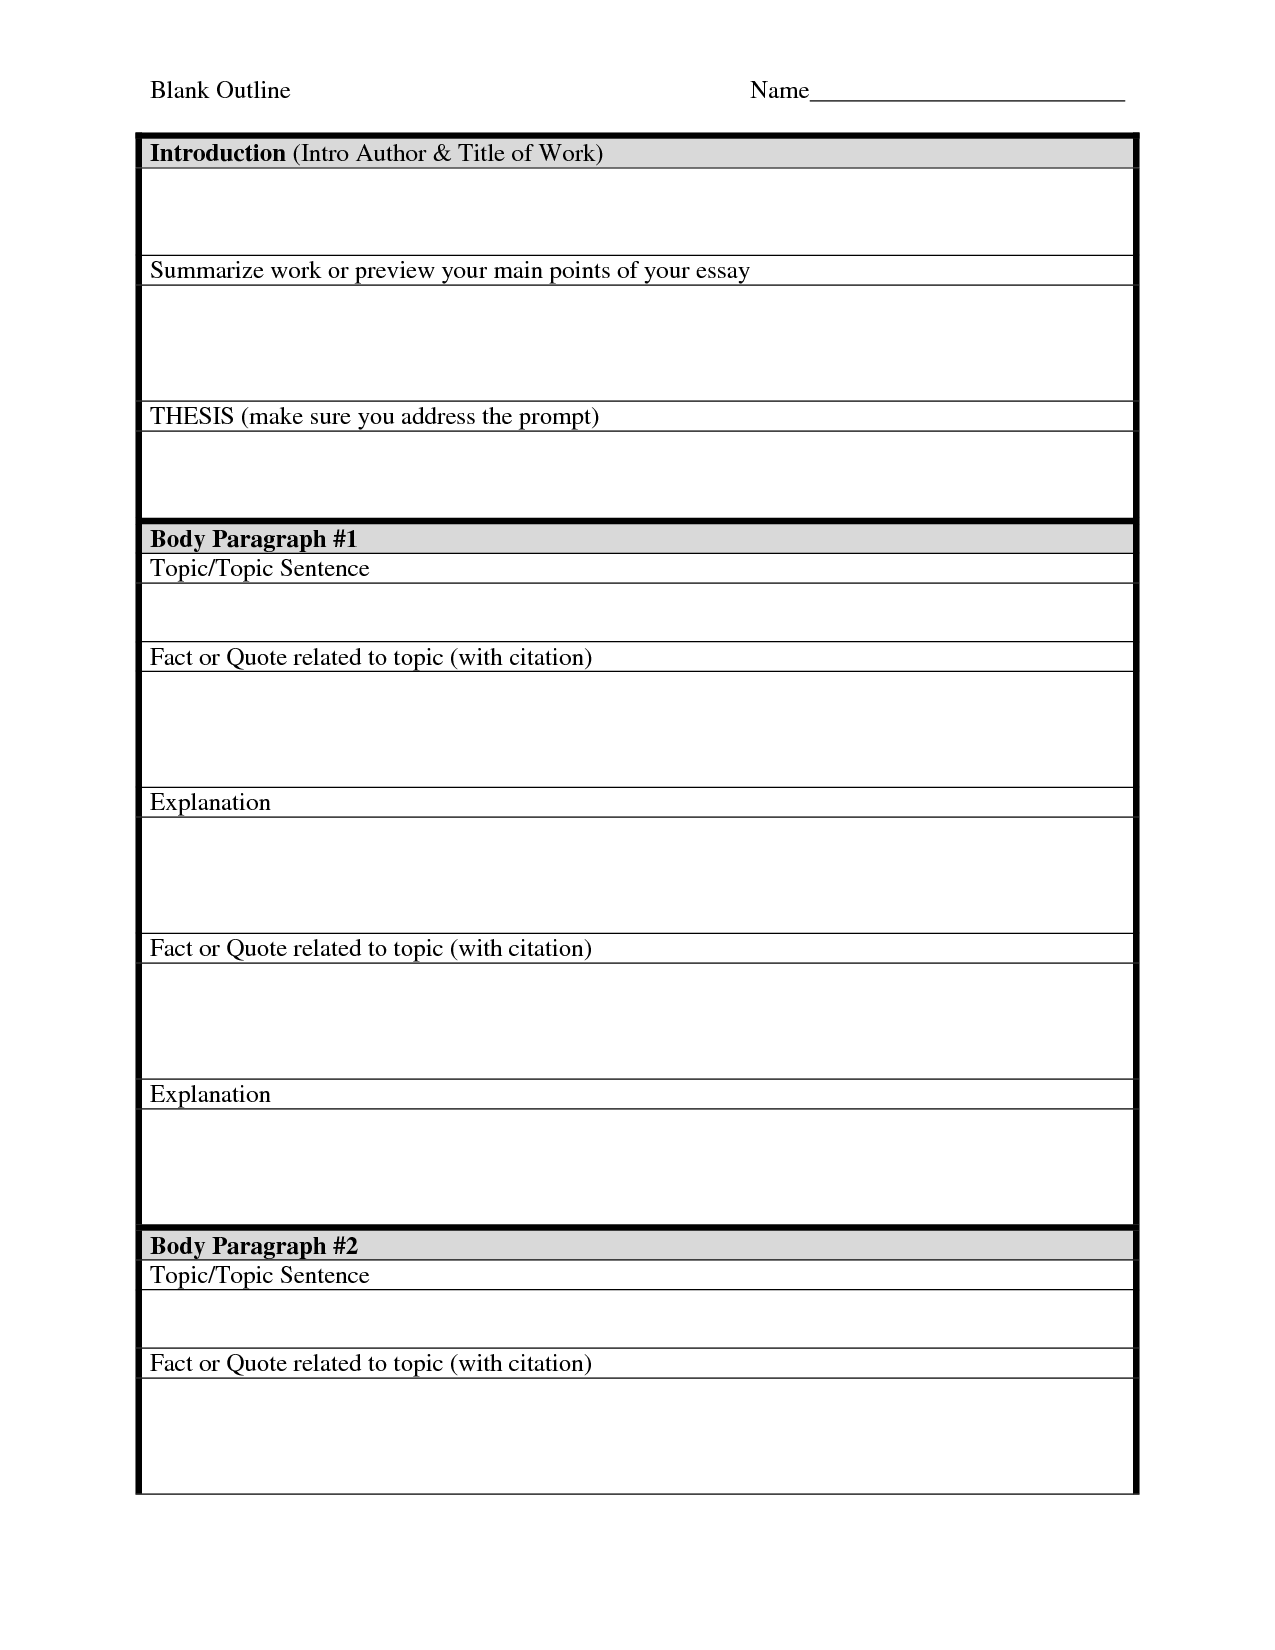 blank outline form research paper